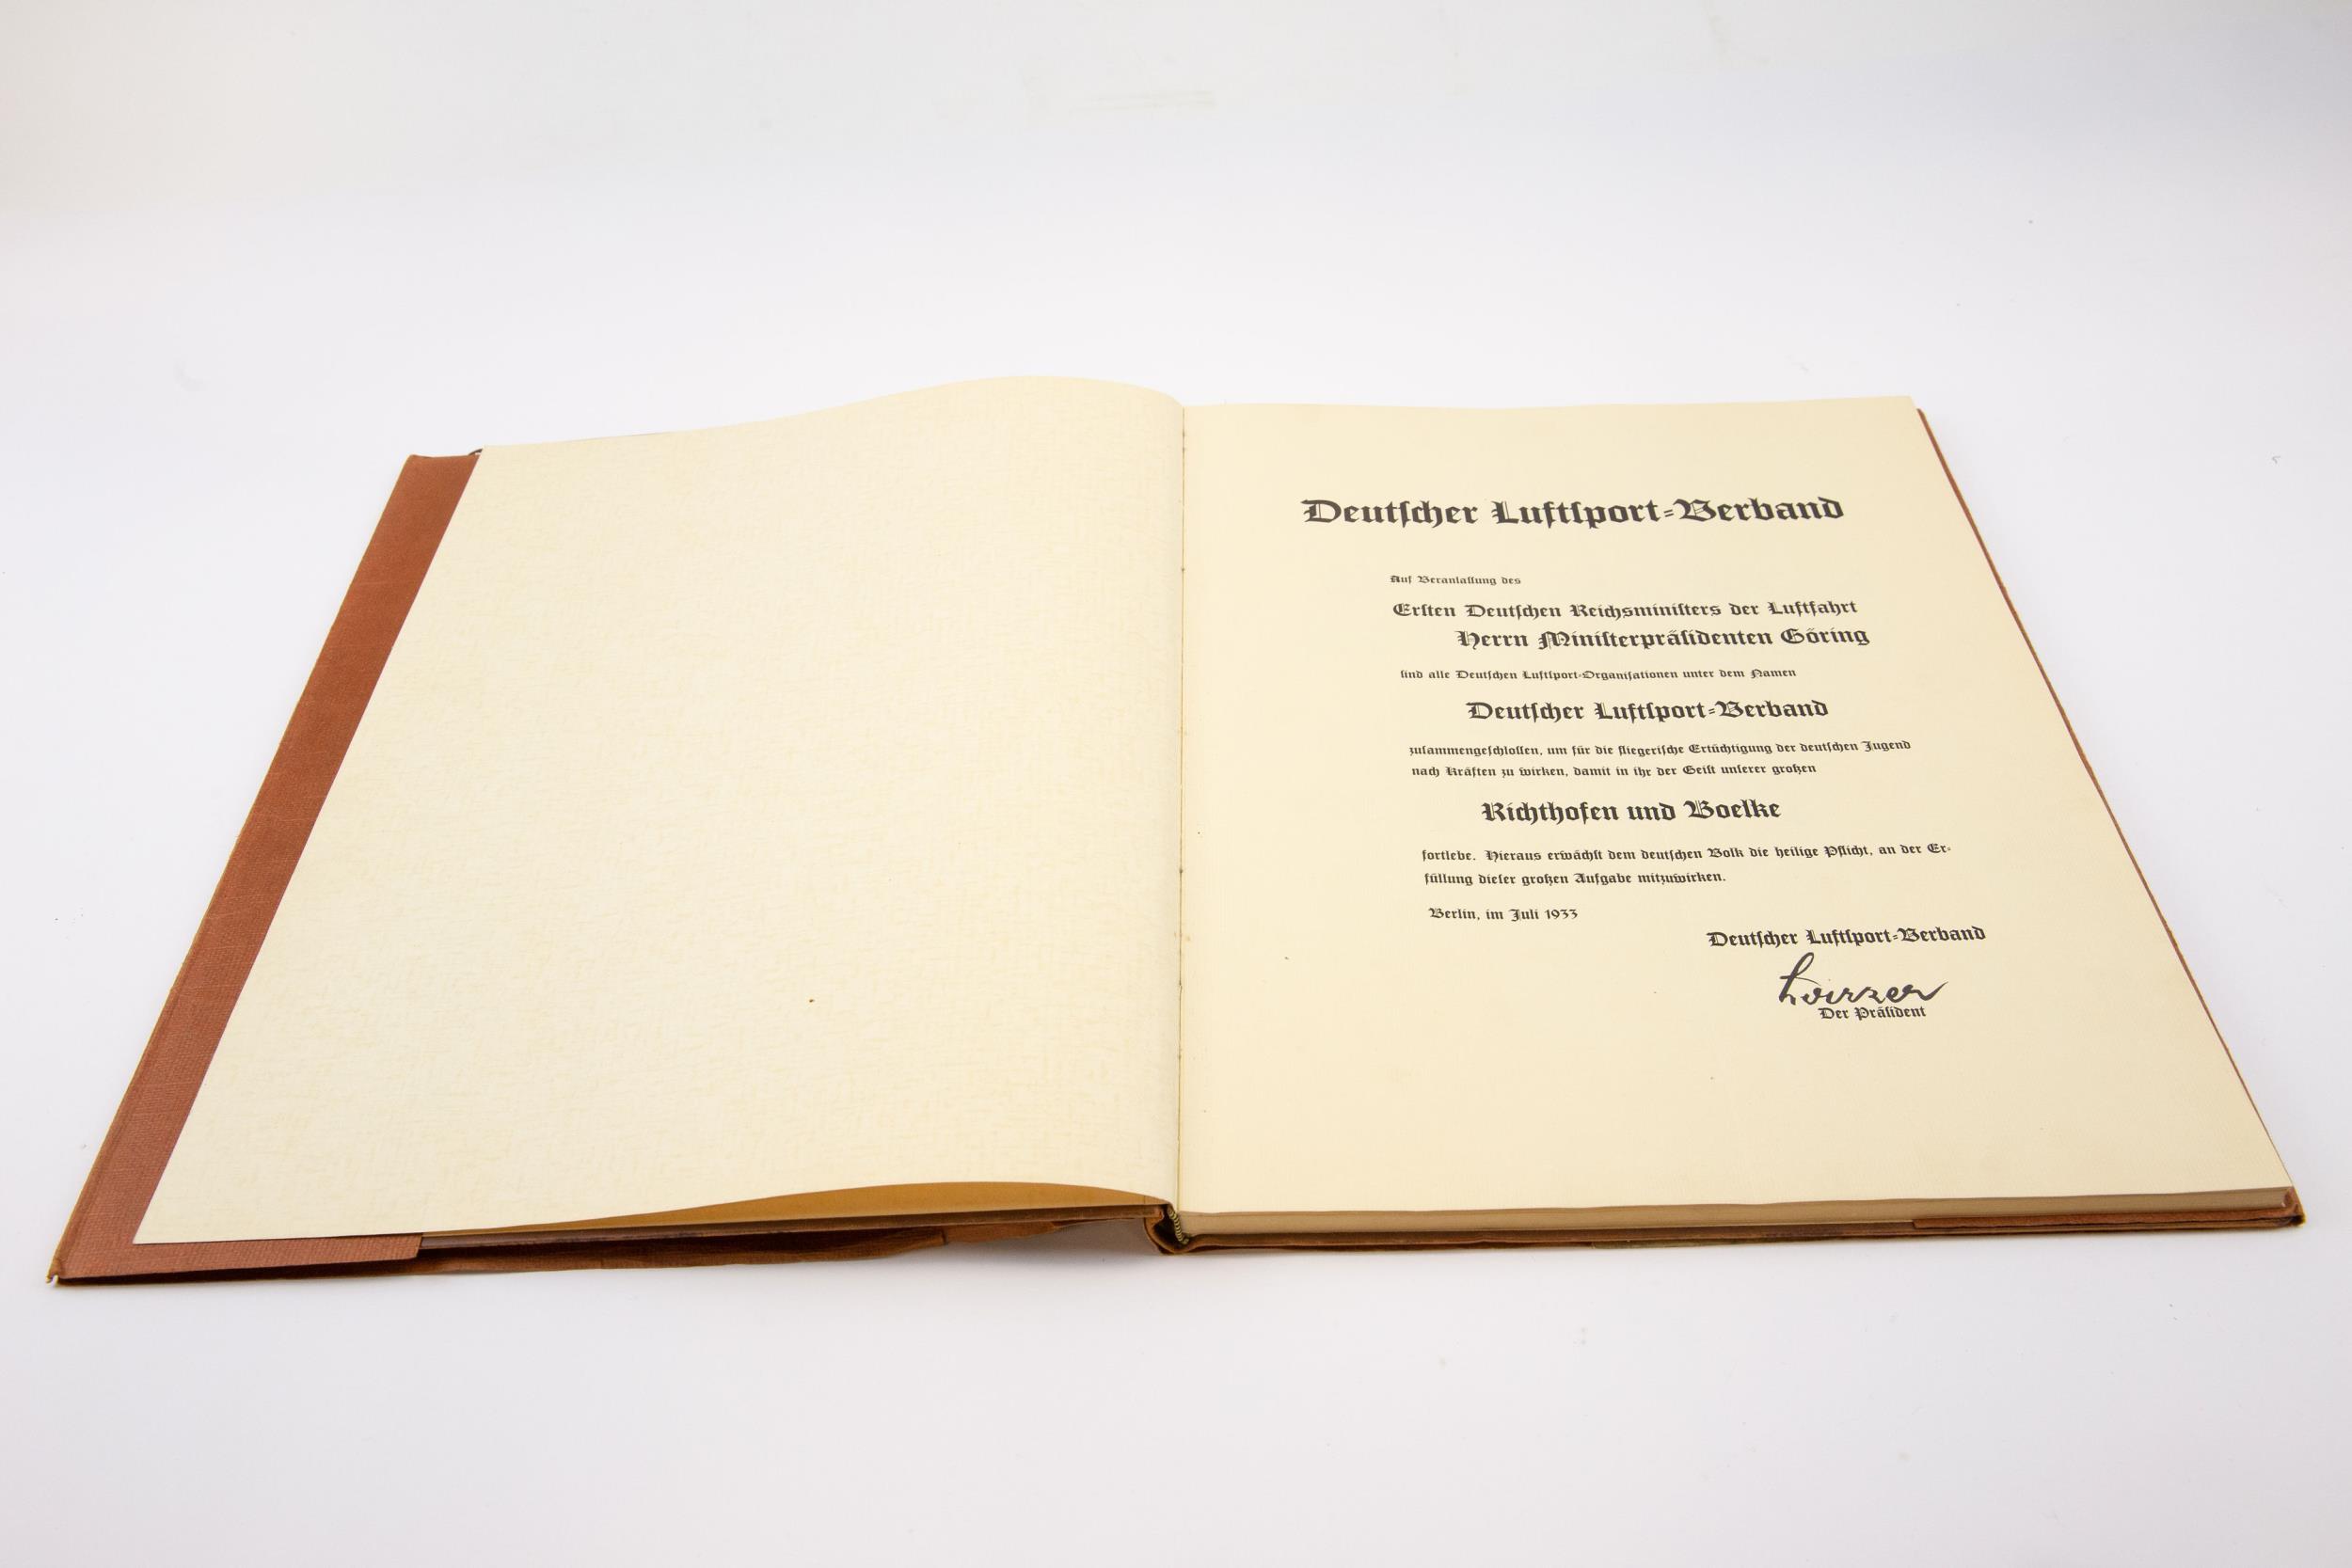 An interesting large format "visitors book", headed "Deutscher Luftsport Verband", commemorating the